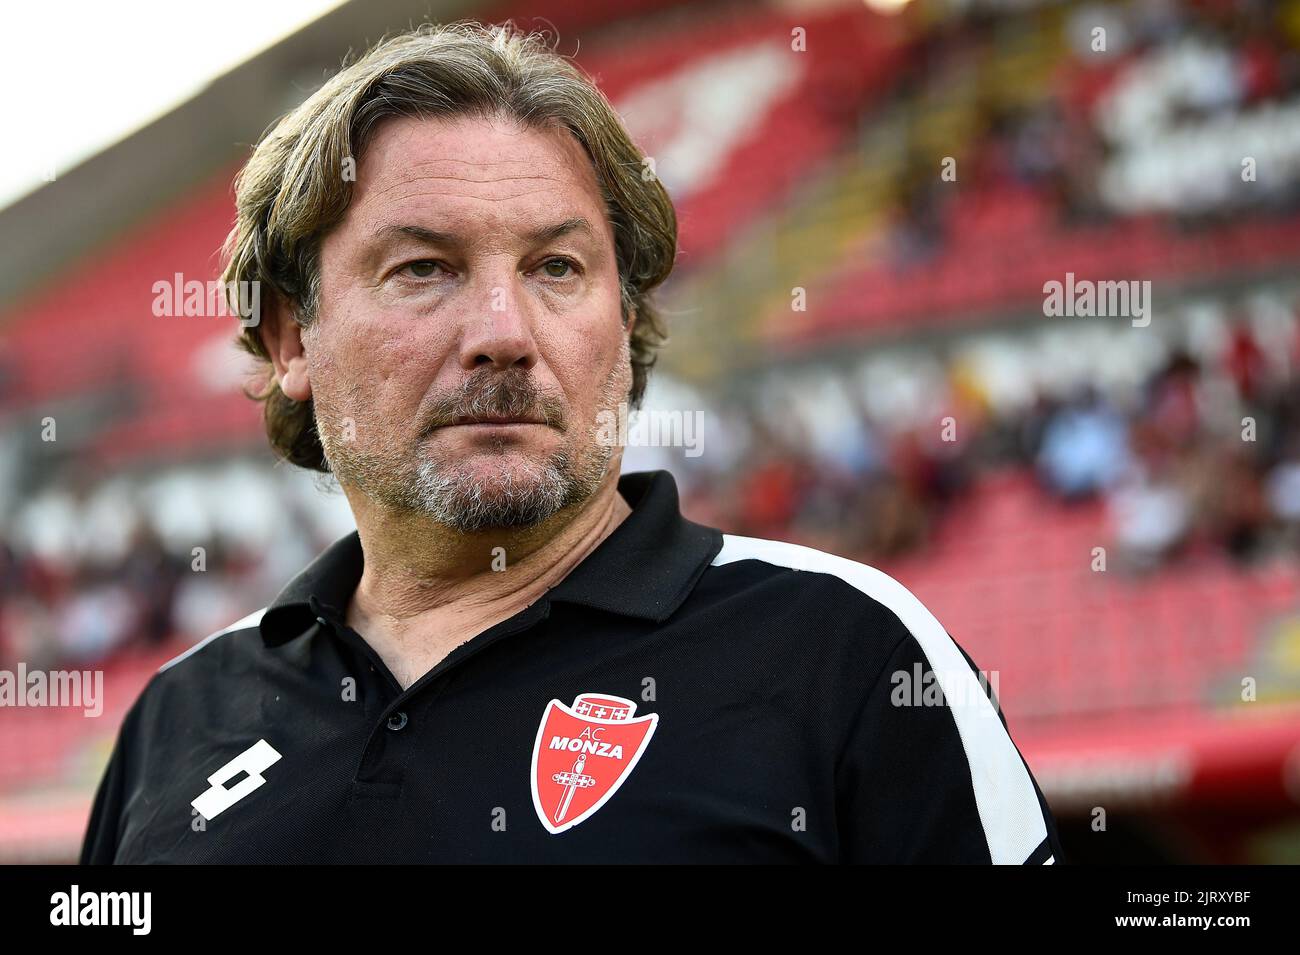 Monza, Italy. 26 August 2022. Giovanni Stroppa, head coach of AC Monza, looks on prior to the Serie A football match between AC Monza and Udinese Calcio. Credit: Nicolò Campo/Alamy Live News Stock Photo